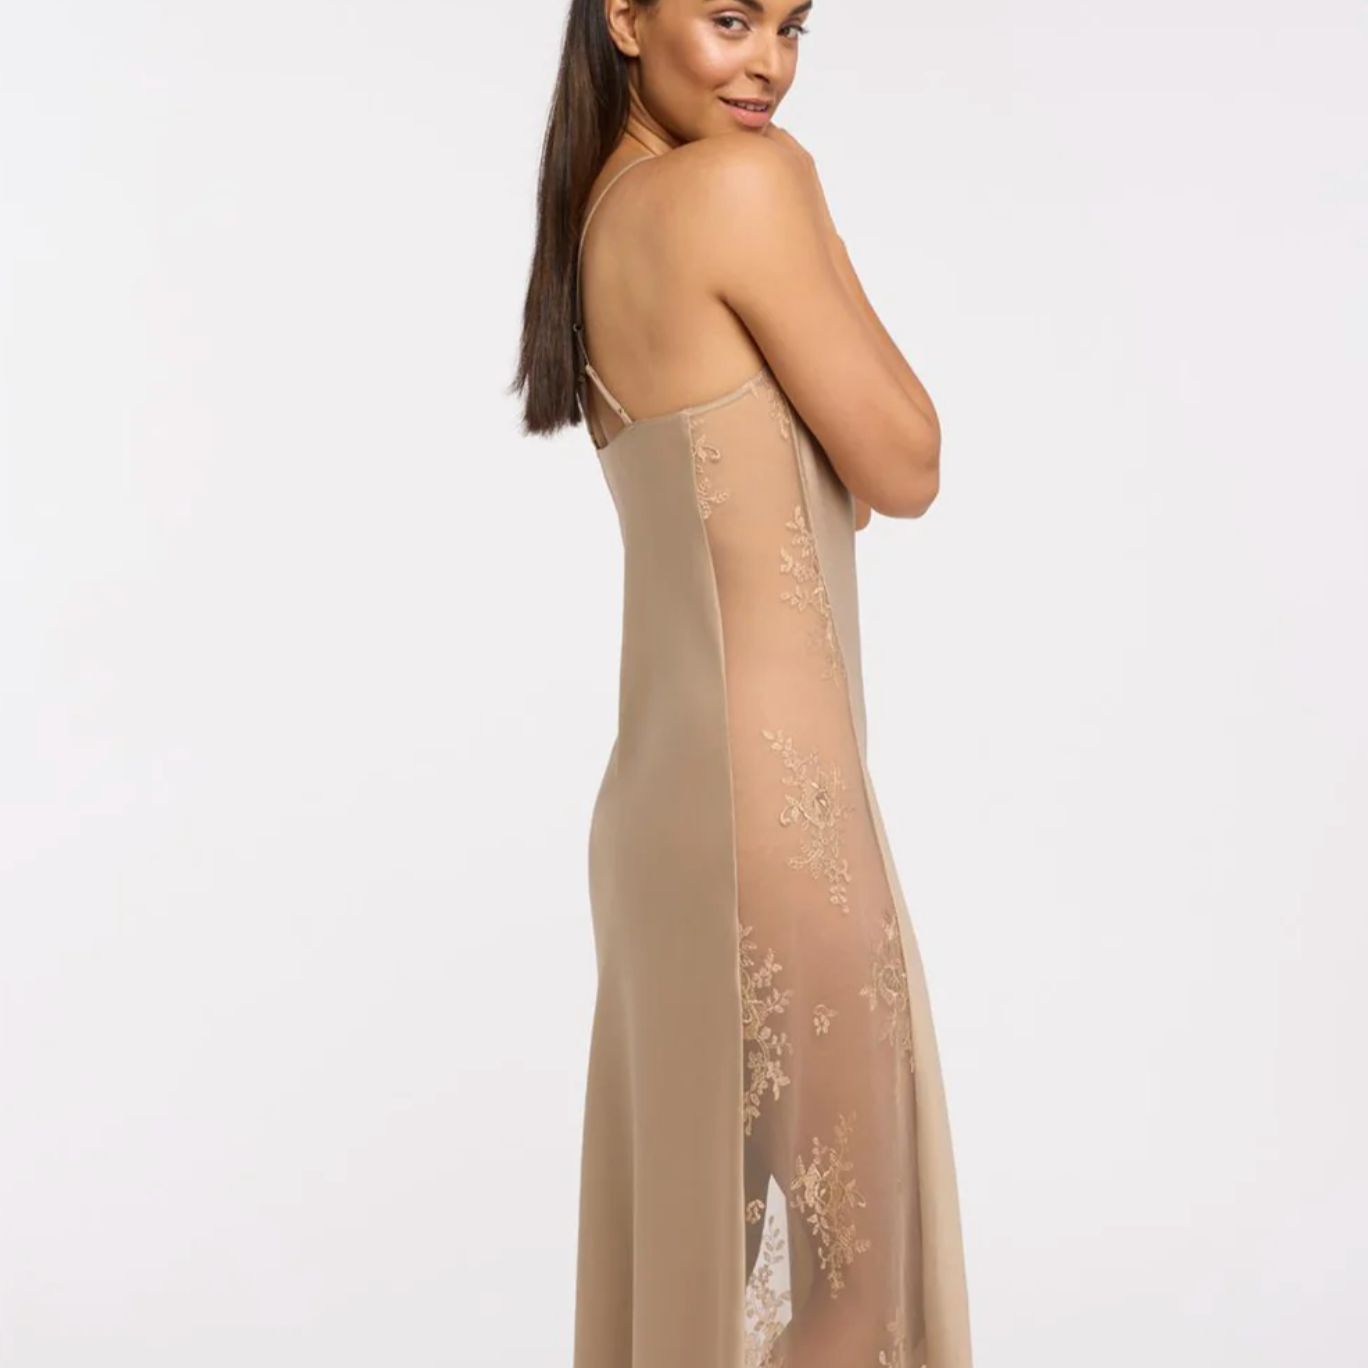 Rya Collection Darling Long Gown 219 in Latte-Loungewear-Rya Collection-Latte-XSmall-Anna Bella Fine Lingerie, Reveal Your Most Gorgeous Self!